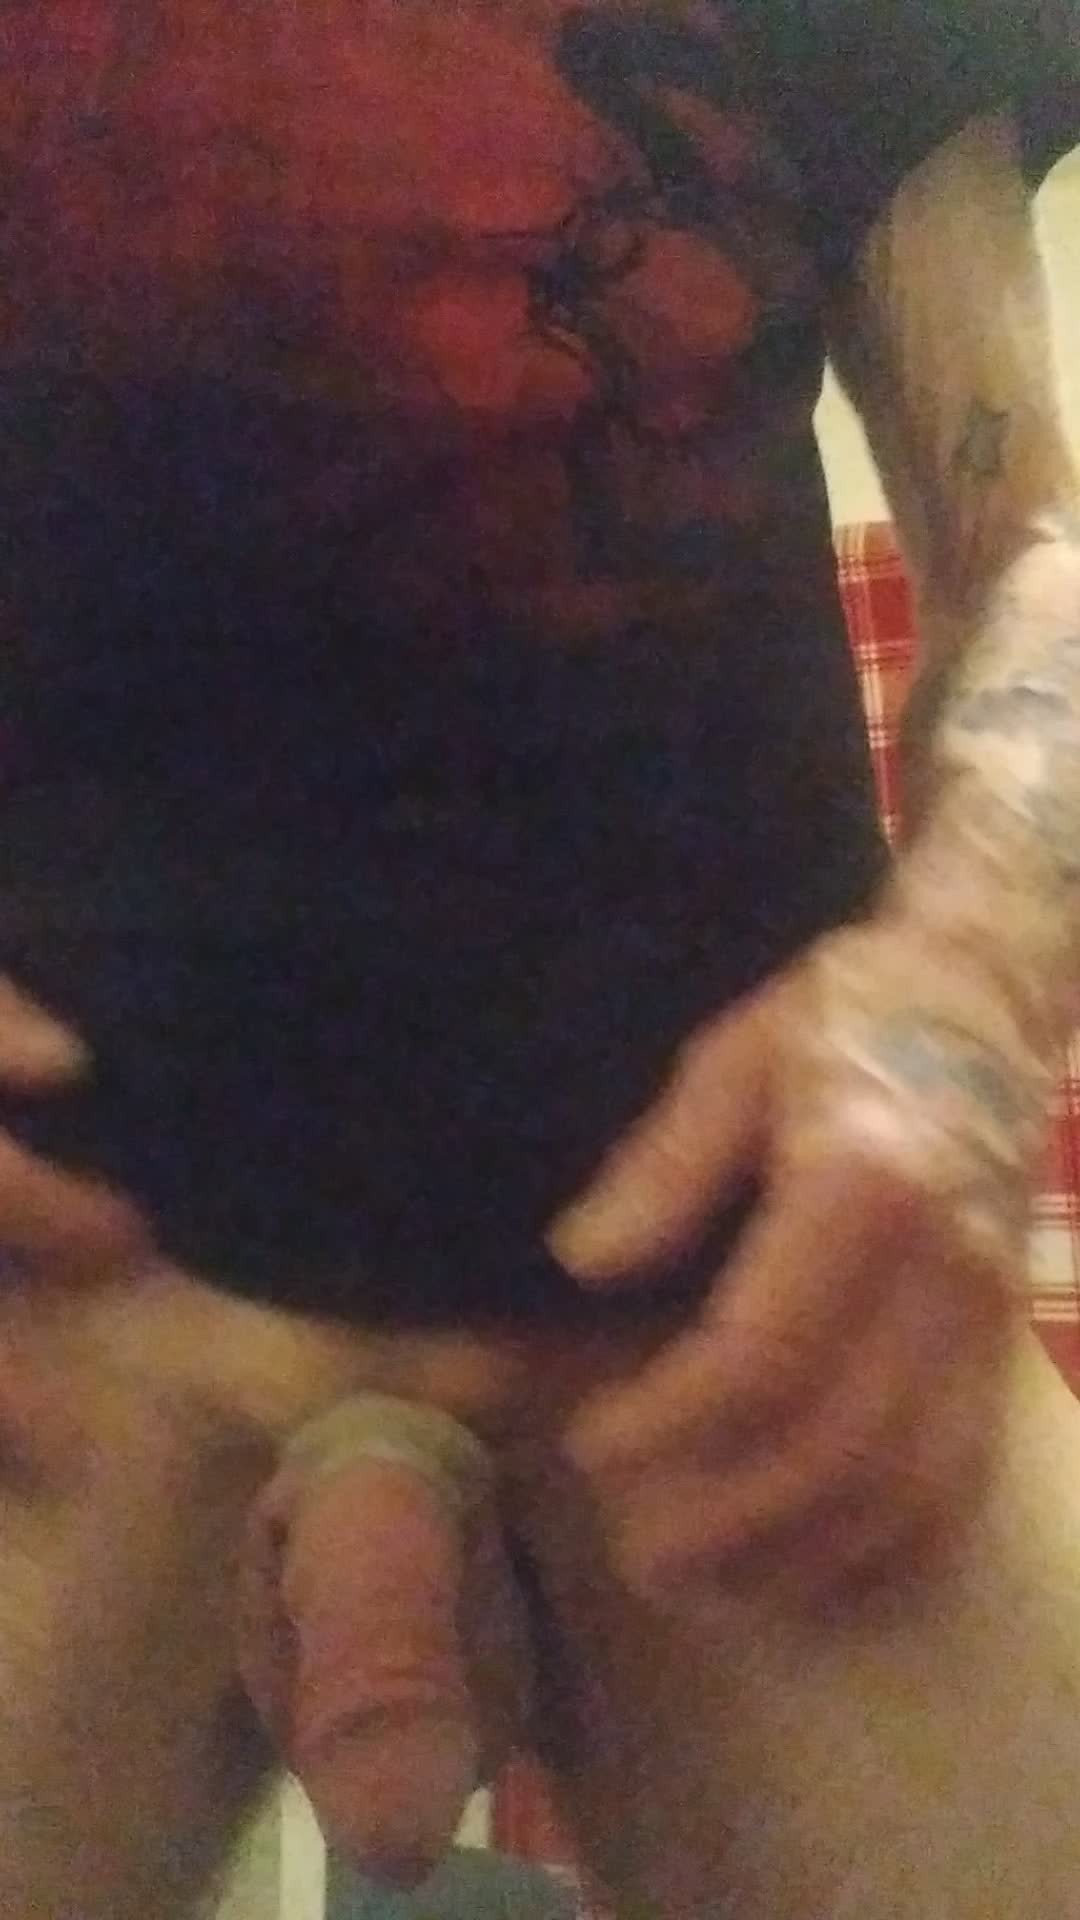 Watch the Video by Cumzalot with the username @Cumzalot707, posted on March 24, 2022. The post is about the topic Rate my pussy or dick. and the text says 'very excited about my company cummin tonight.'